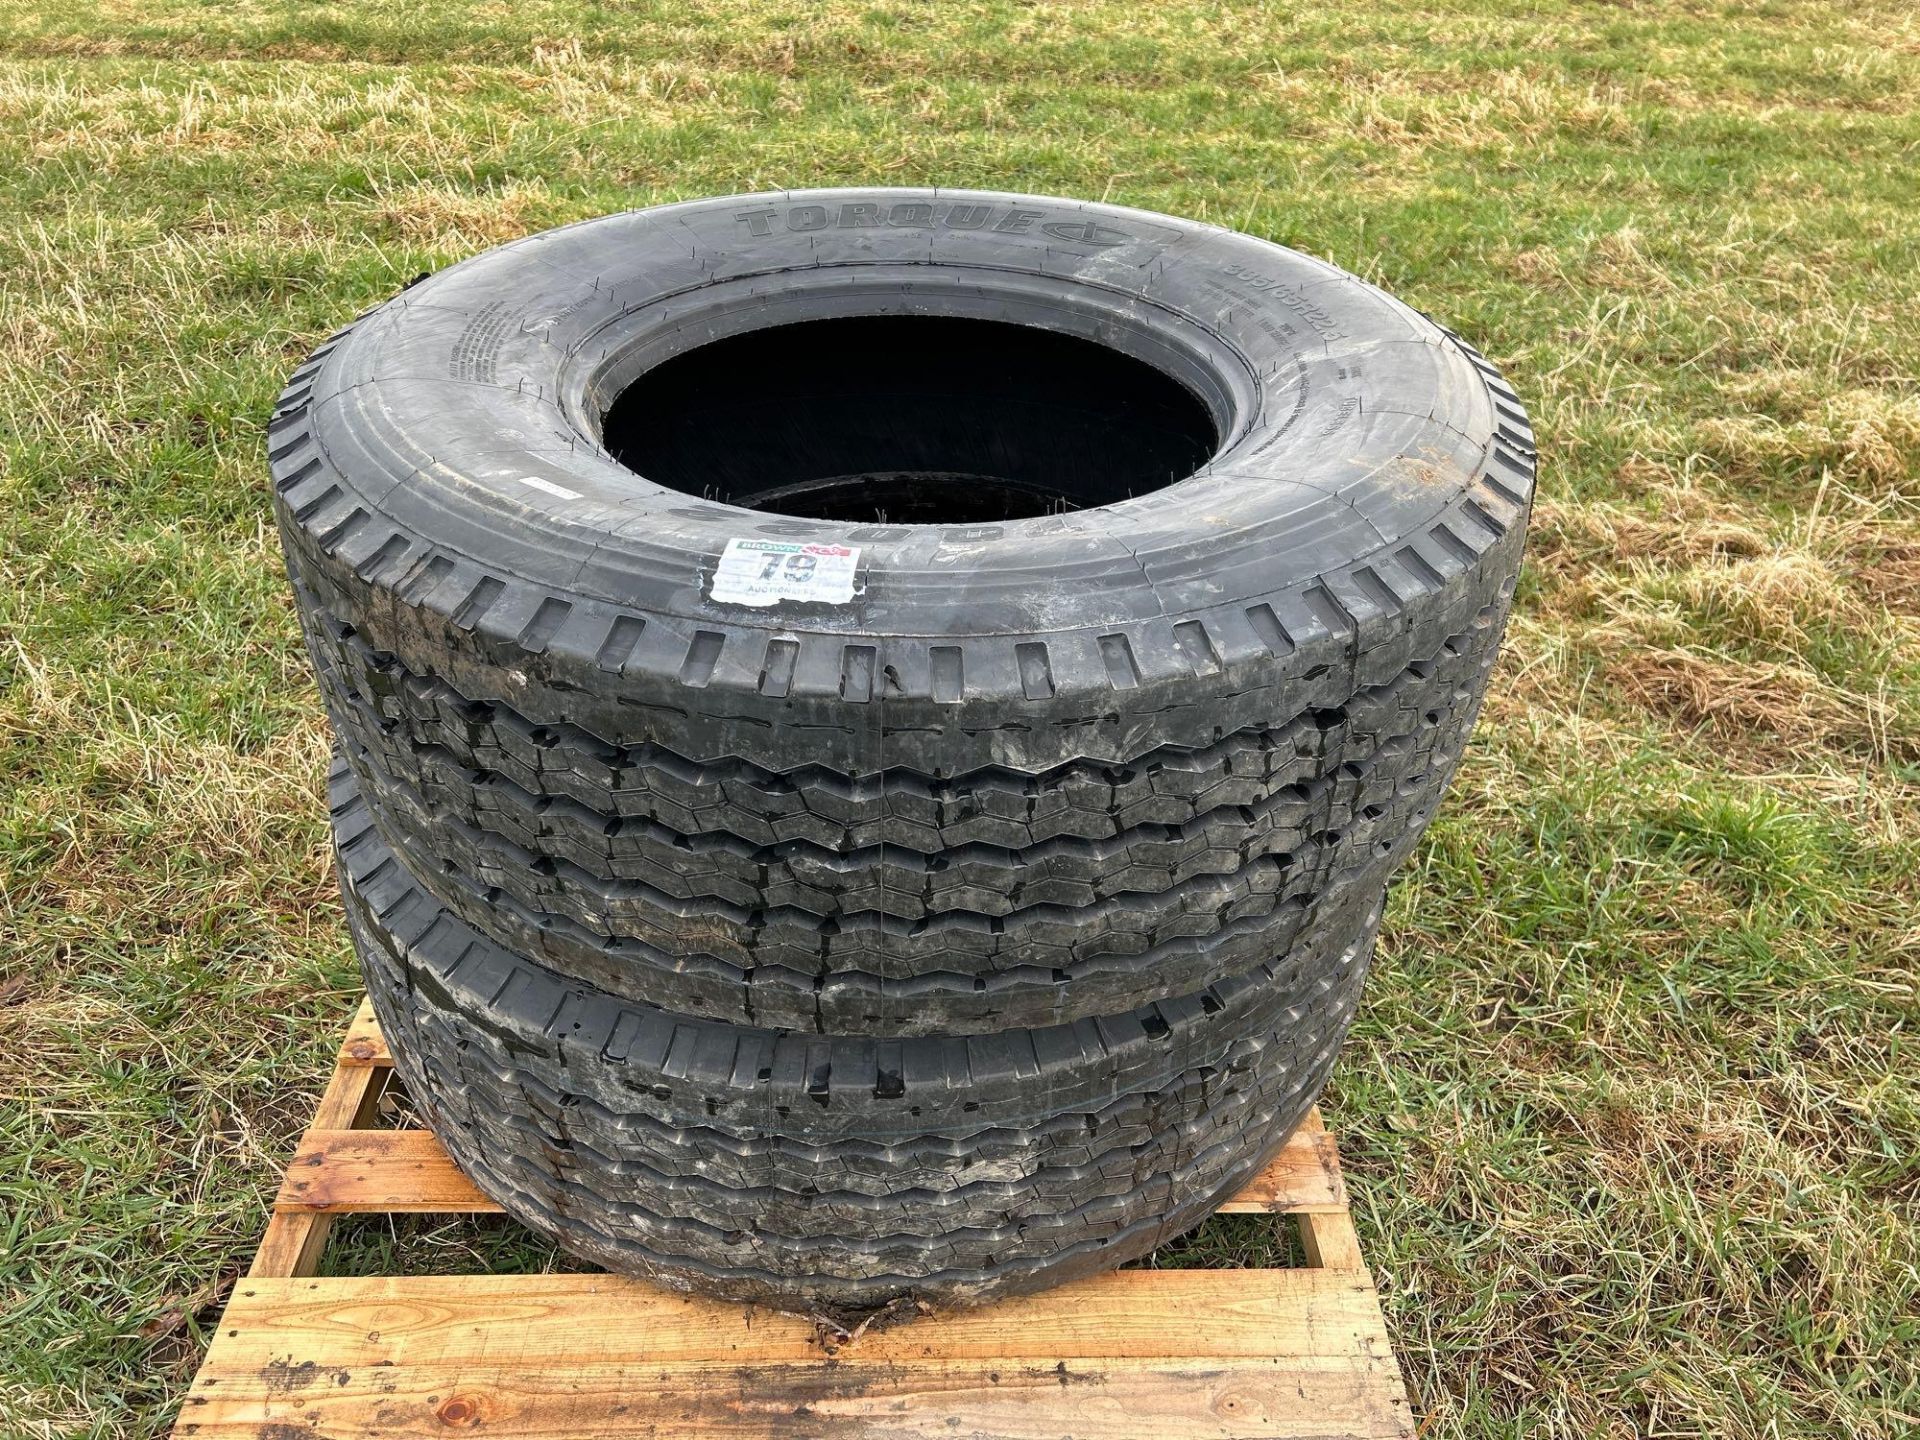 Pair of 385/65R22.5 tyres (Brand New)